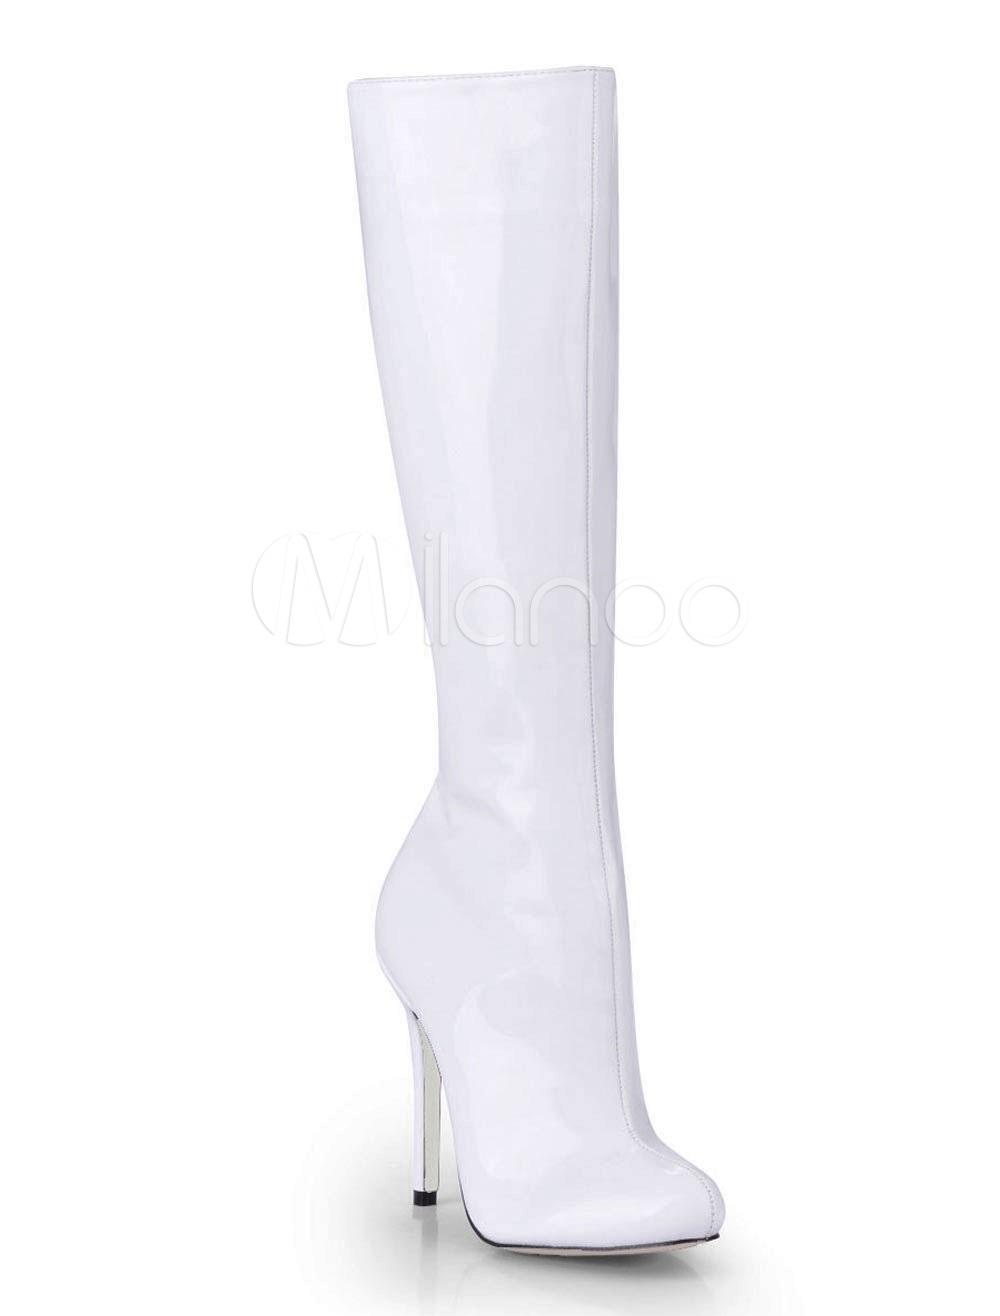 white knee high boots